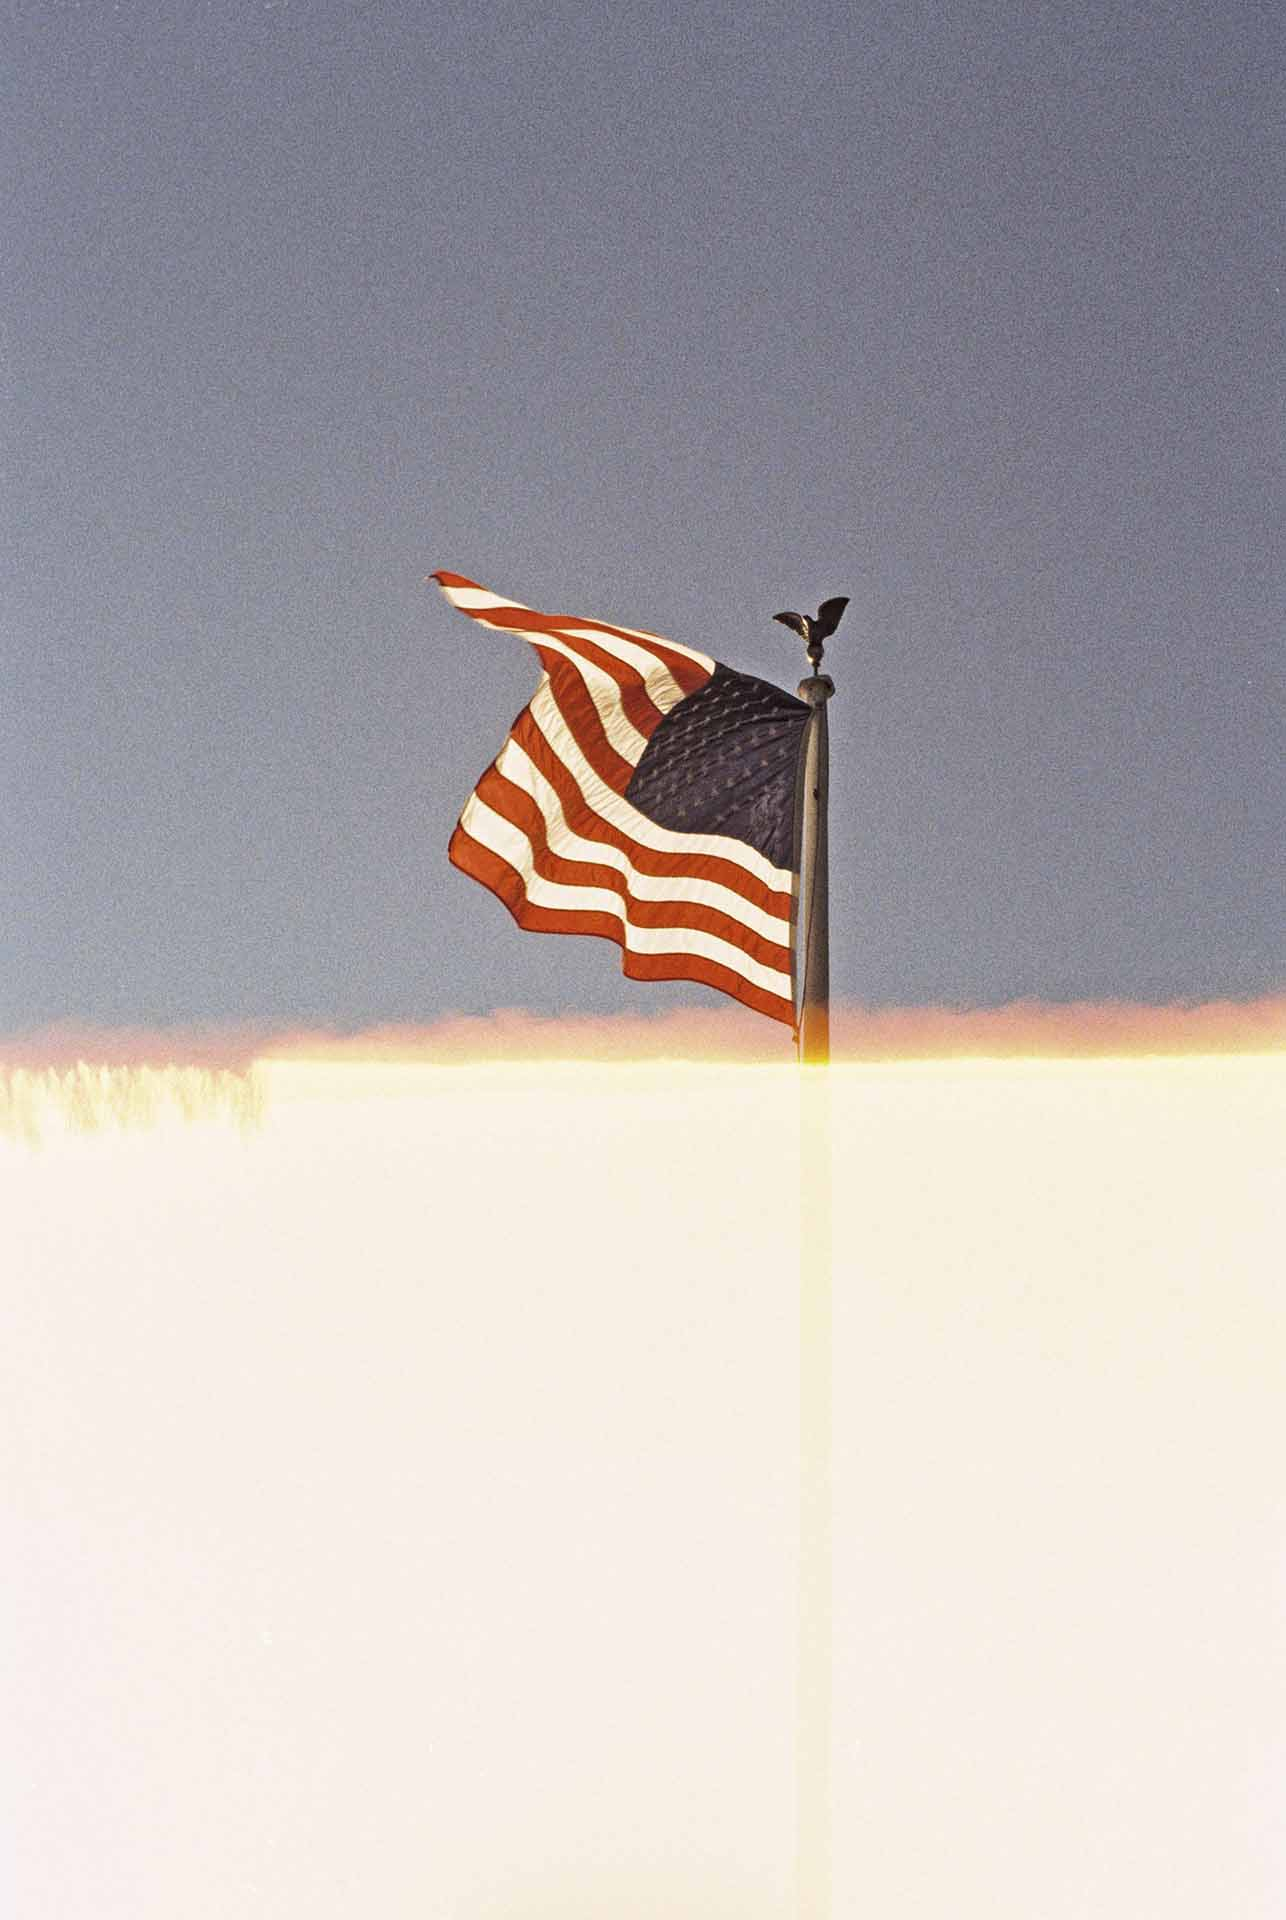 A backwards American flag. The processig of the film made an error that cut off half the frame,making it seem as if the flag is on fire.